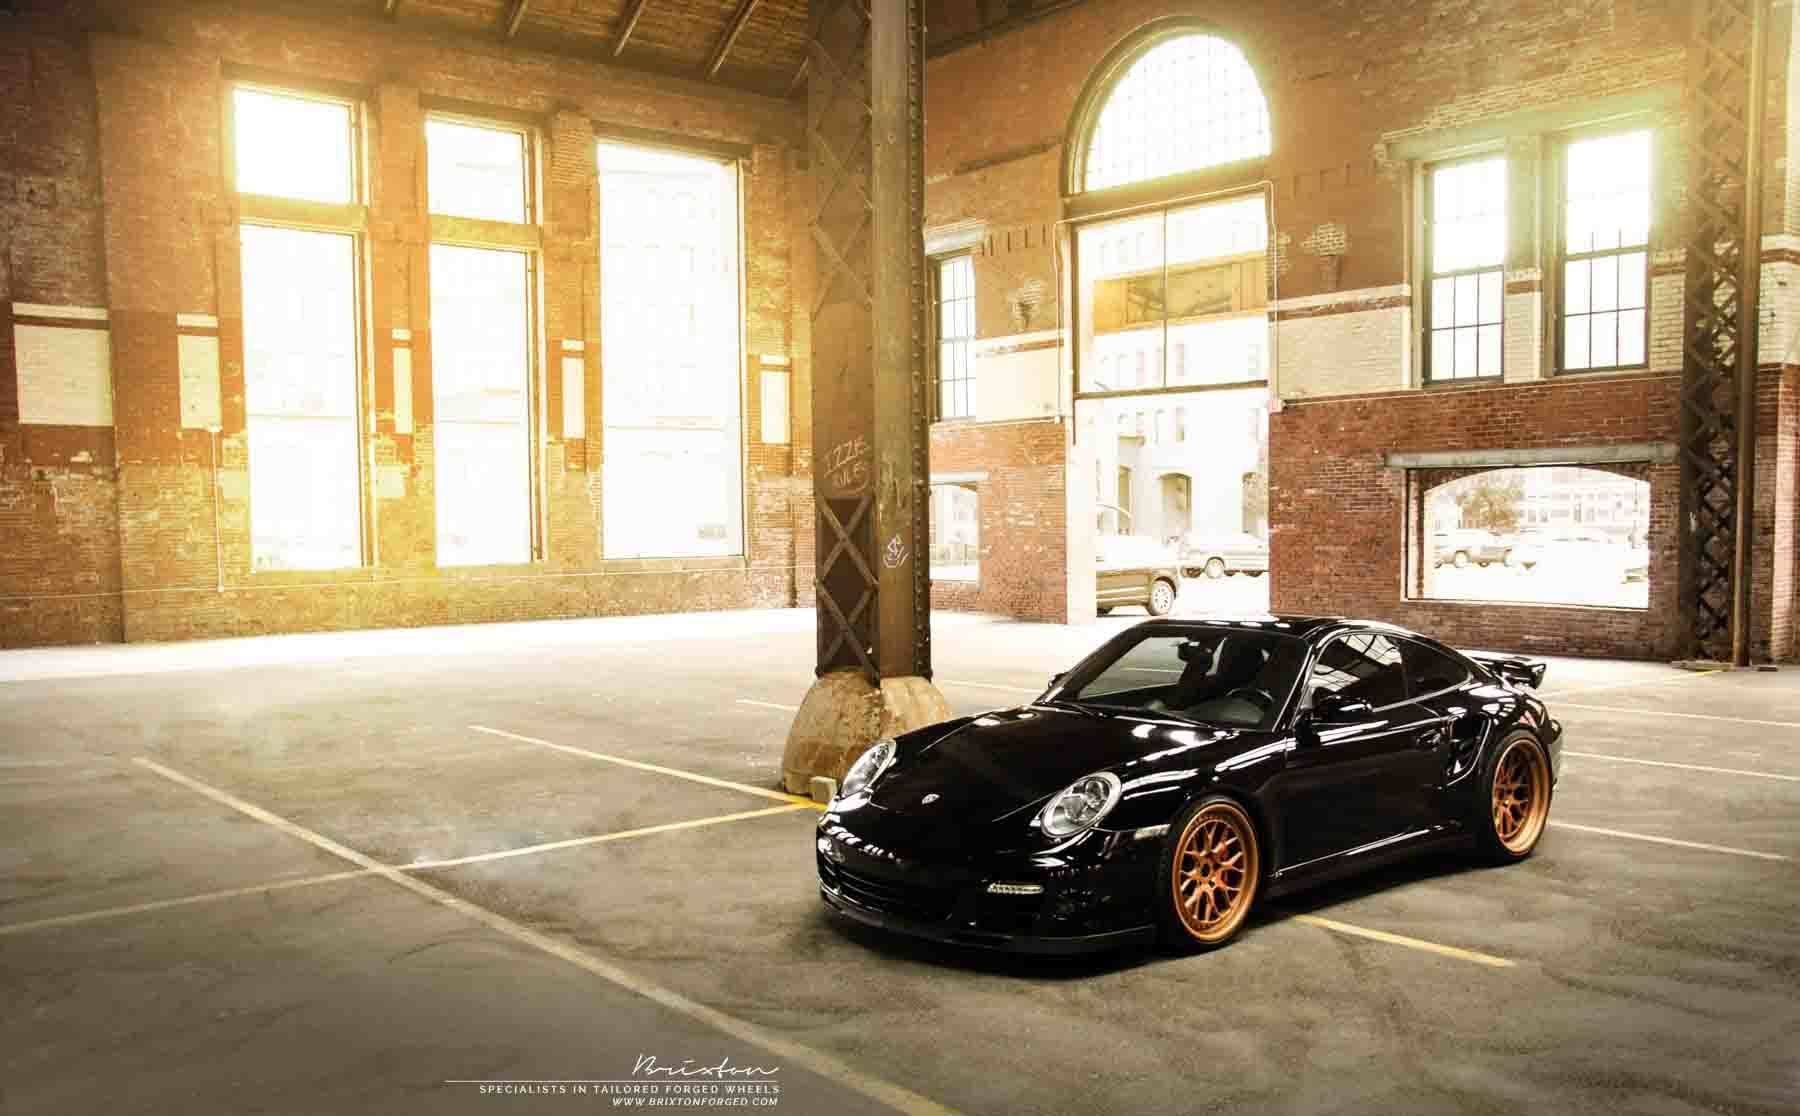 images-products-1-2682-232974970-black-porsche-997-turbo-brixton-forged-cm16-circuit-series-rose-gold-6-1800x1116.jpg